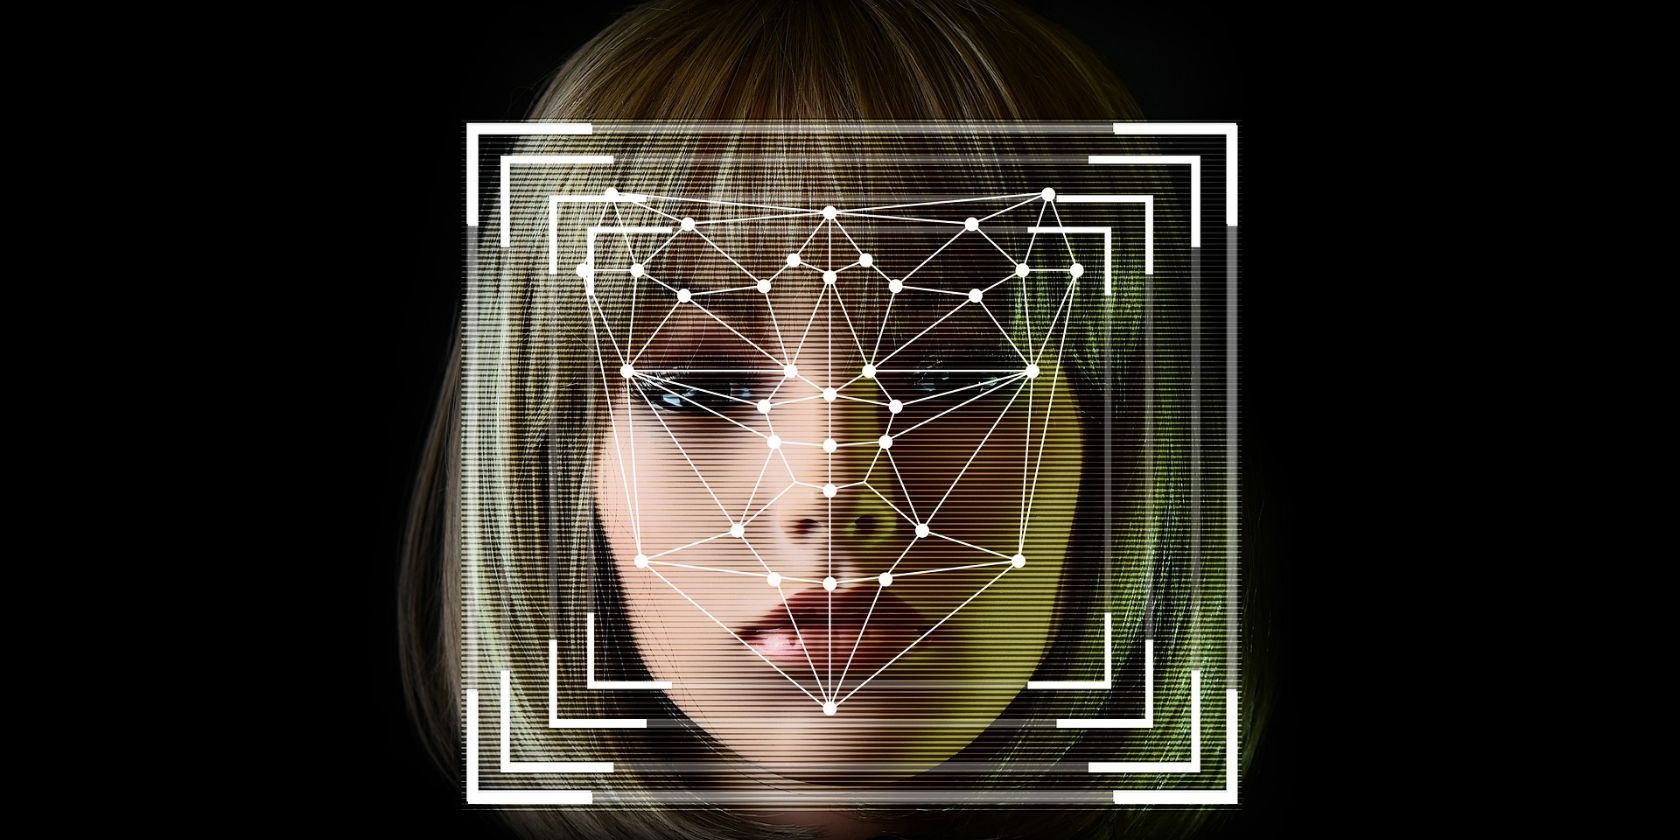 Face Detection Scan Image of a Woman